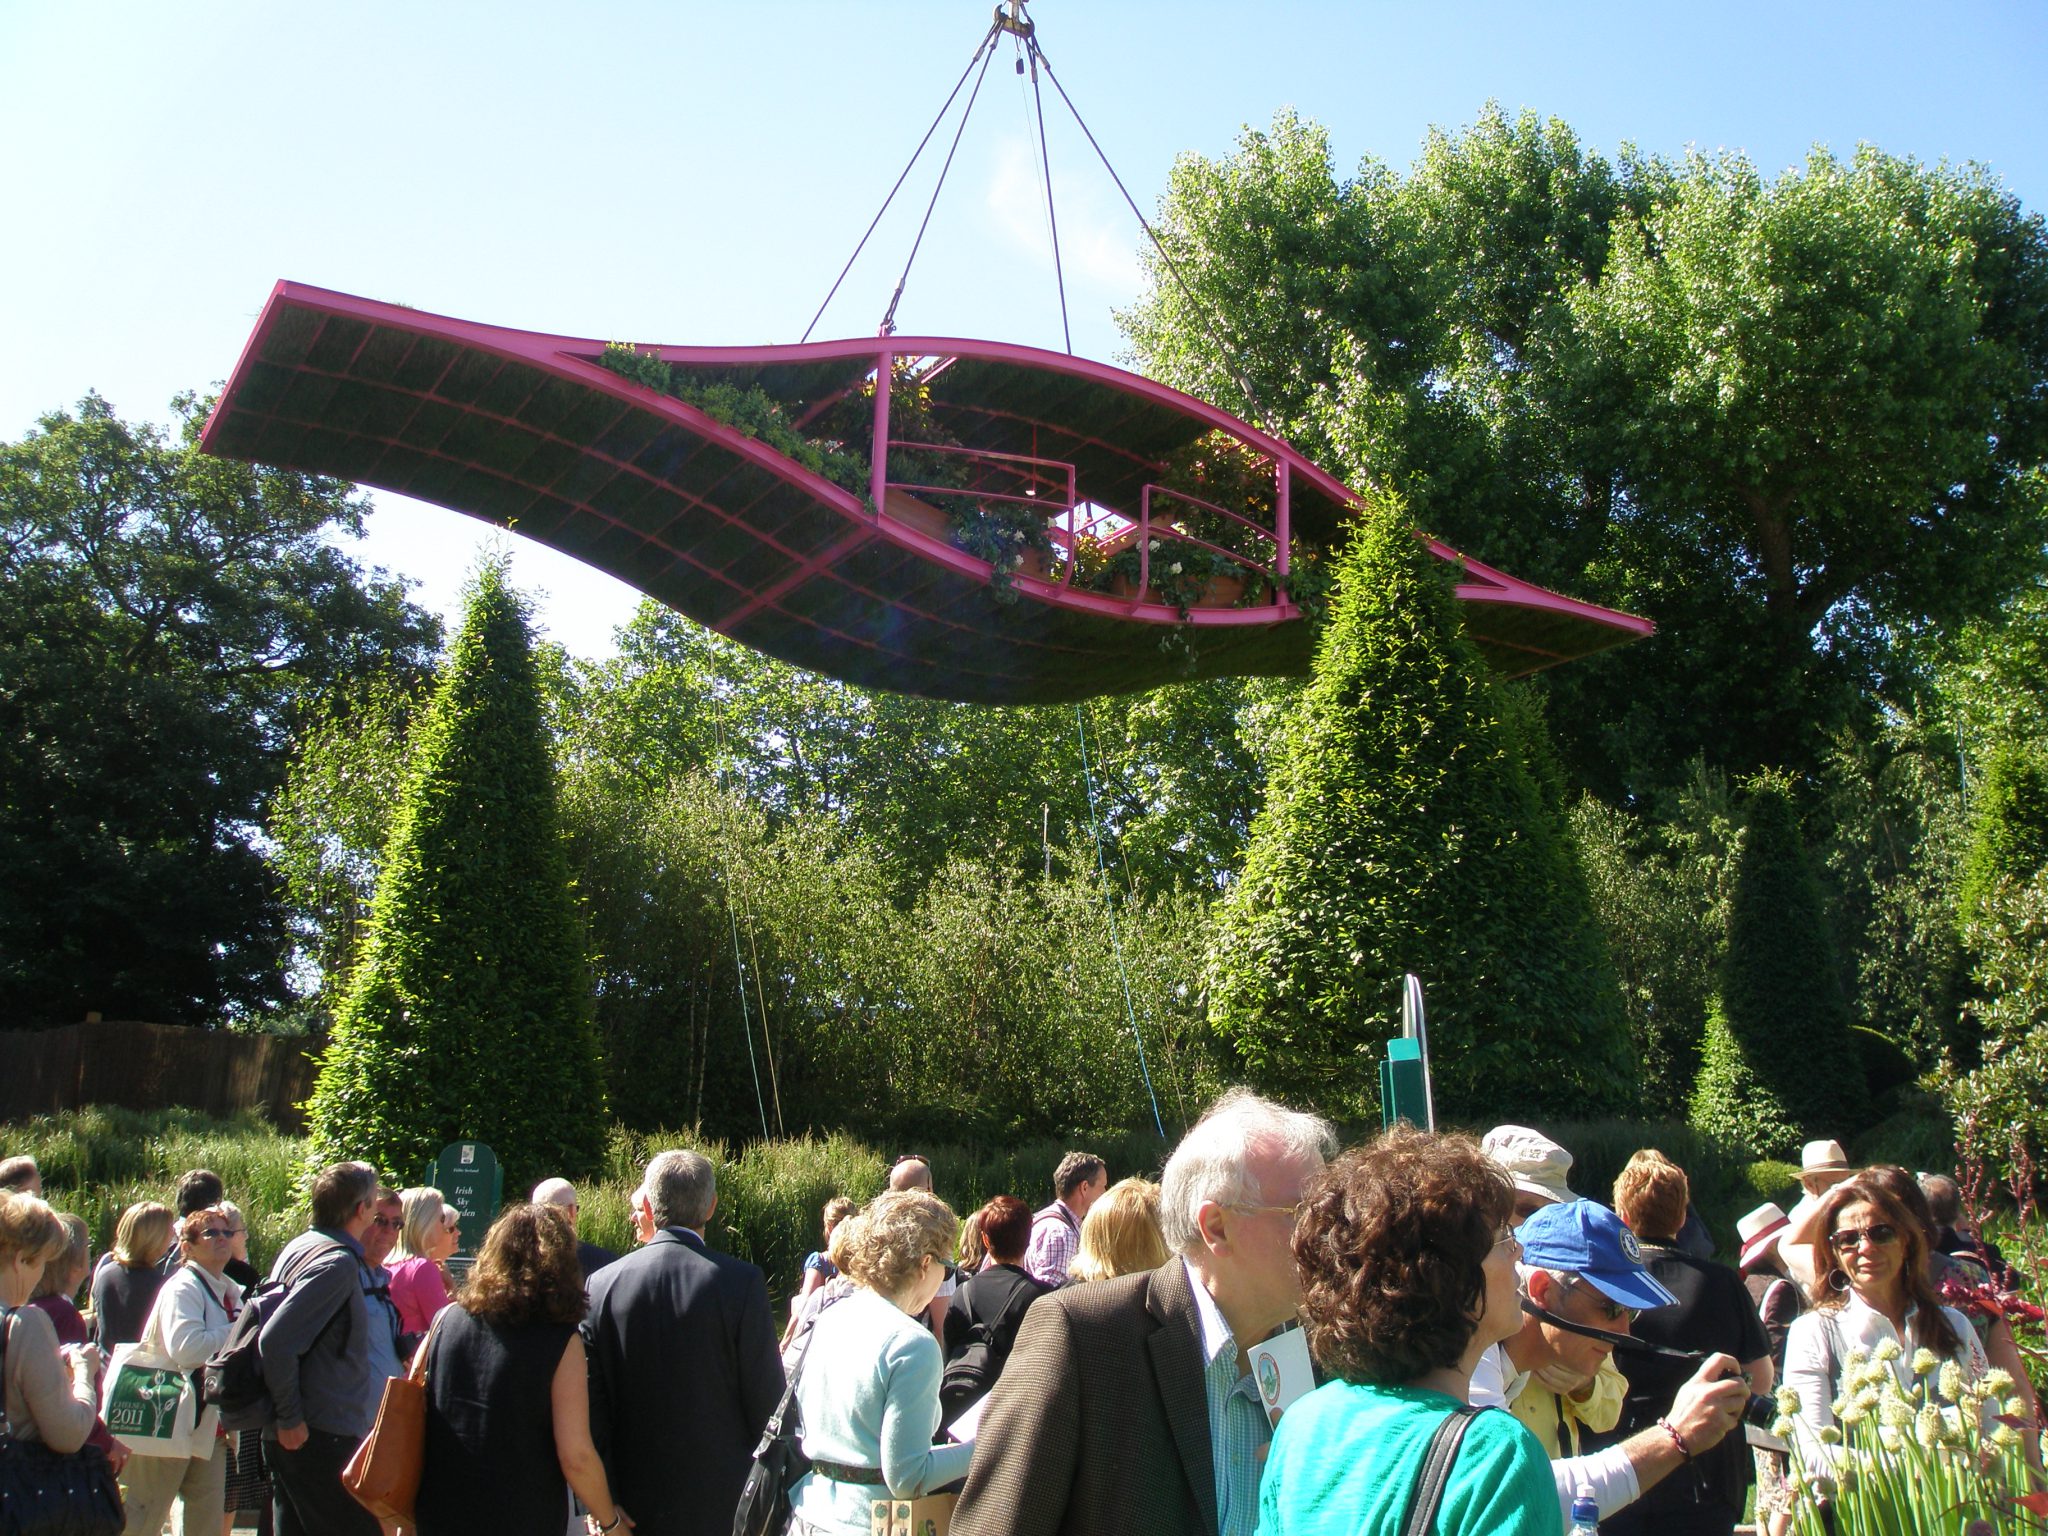 At the Chelsea Flower Show in May 2011